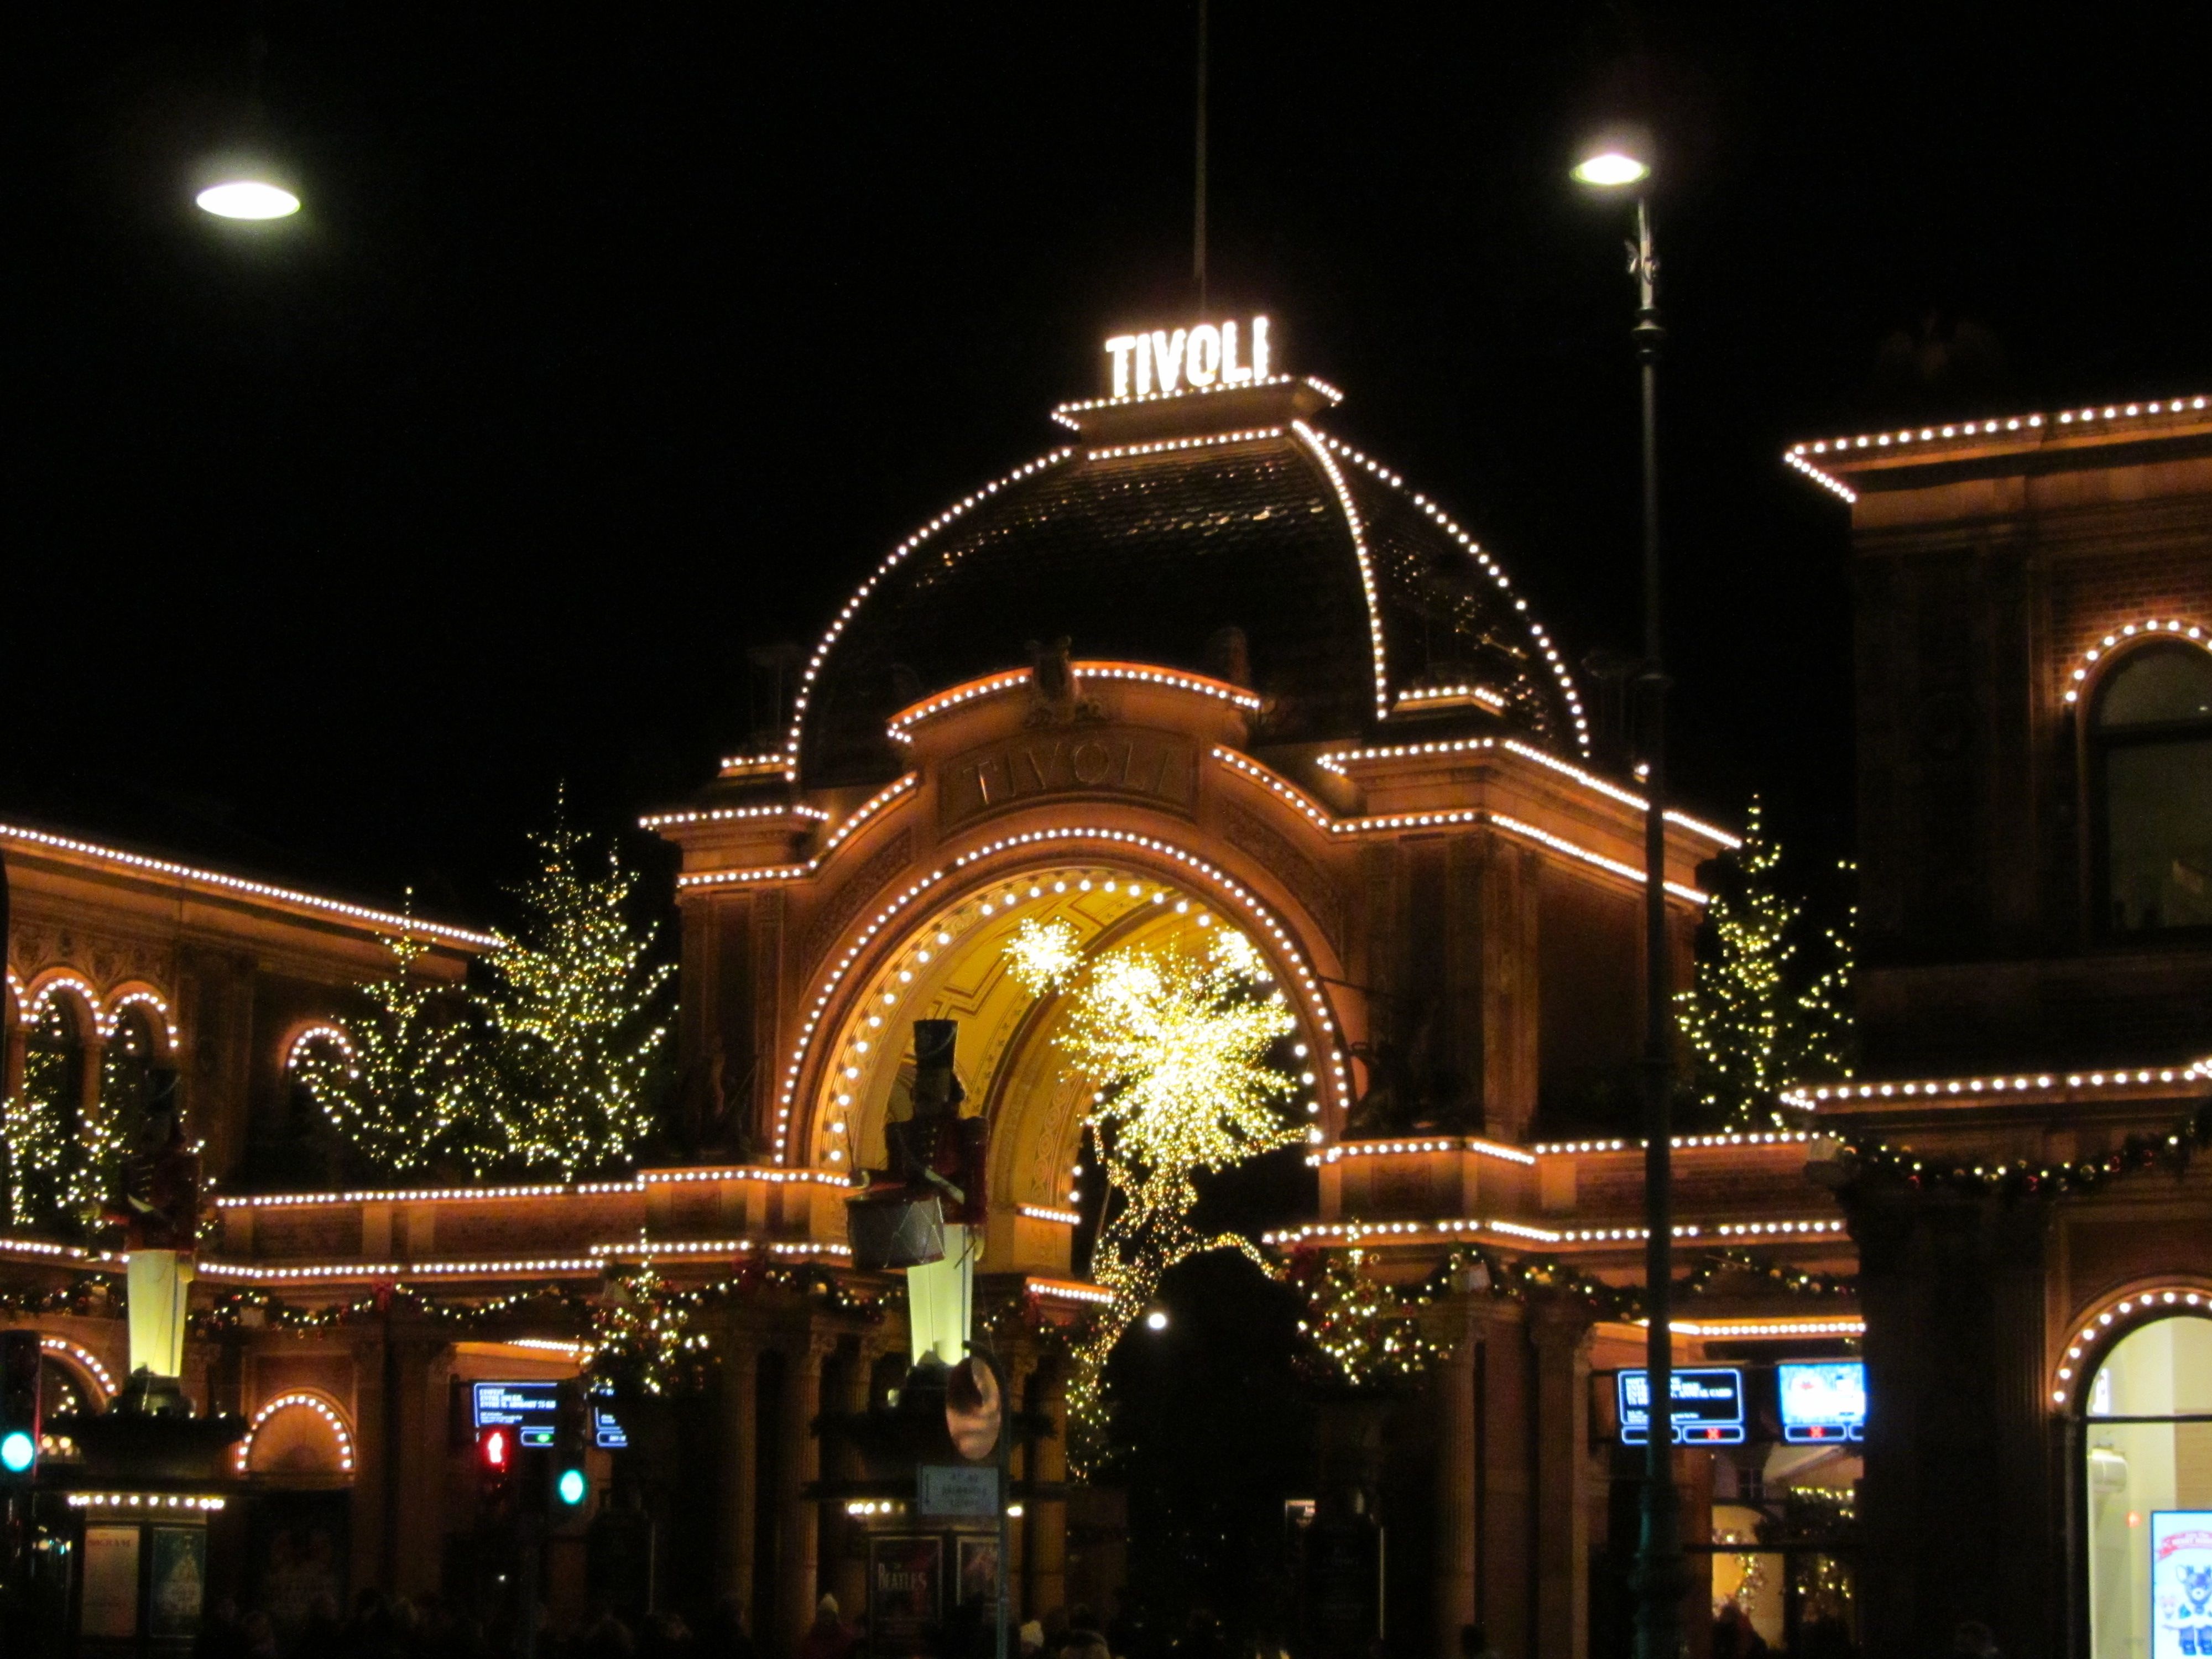 Let there be light! Christmas season at Tivoli Gardens is underway!